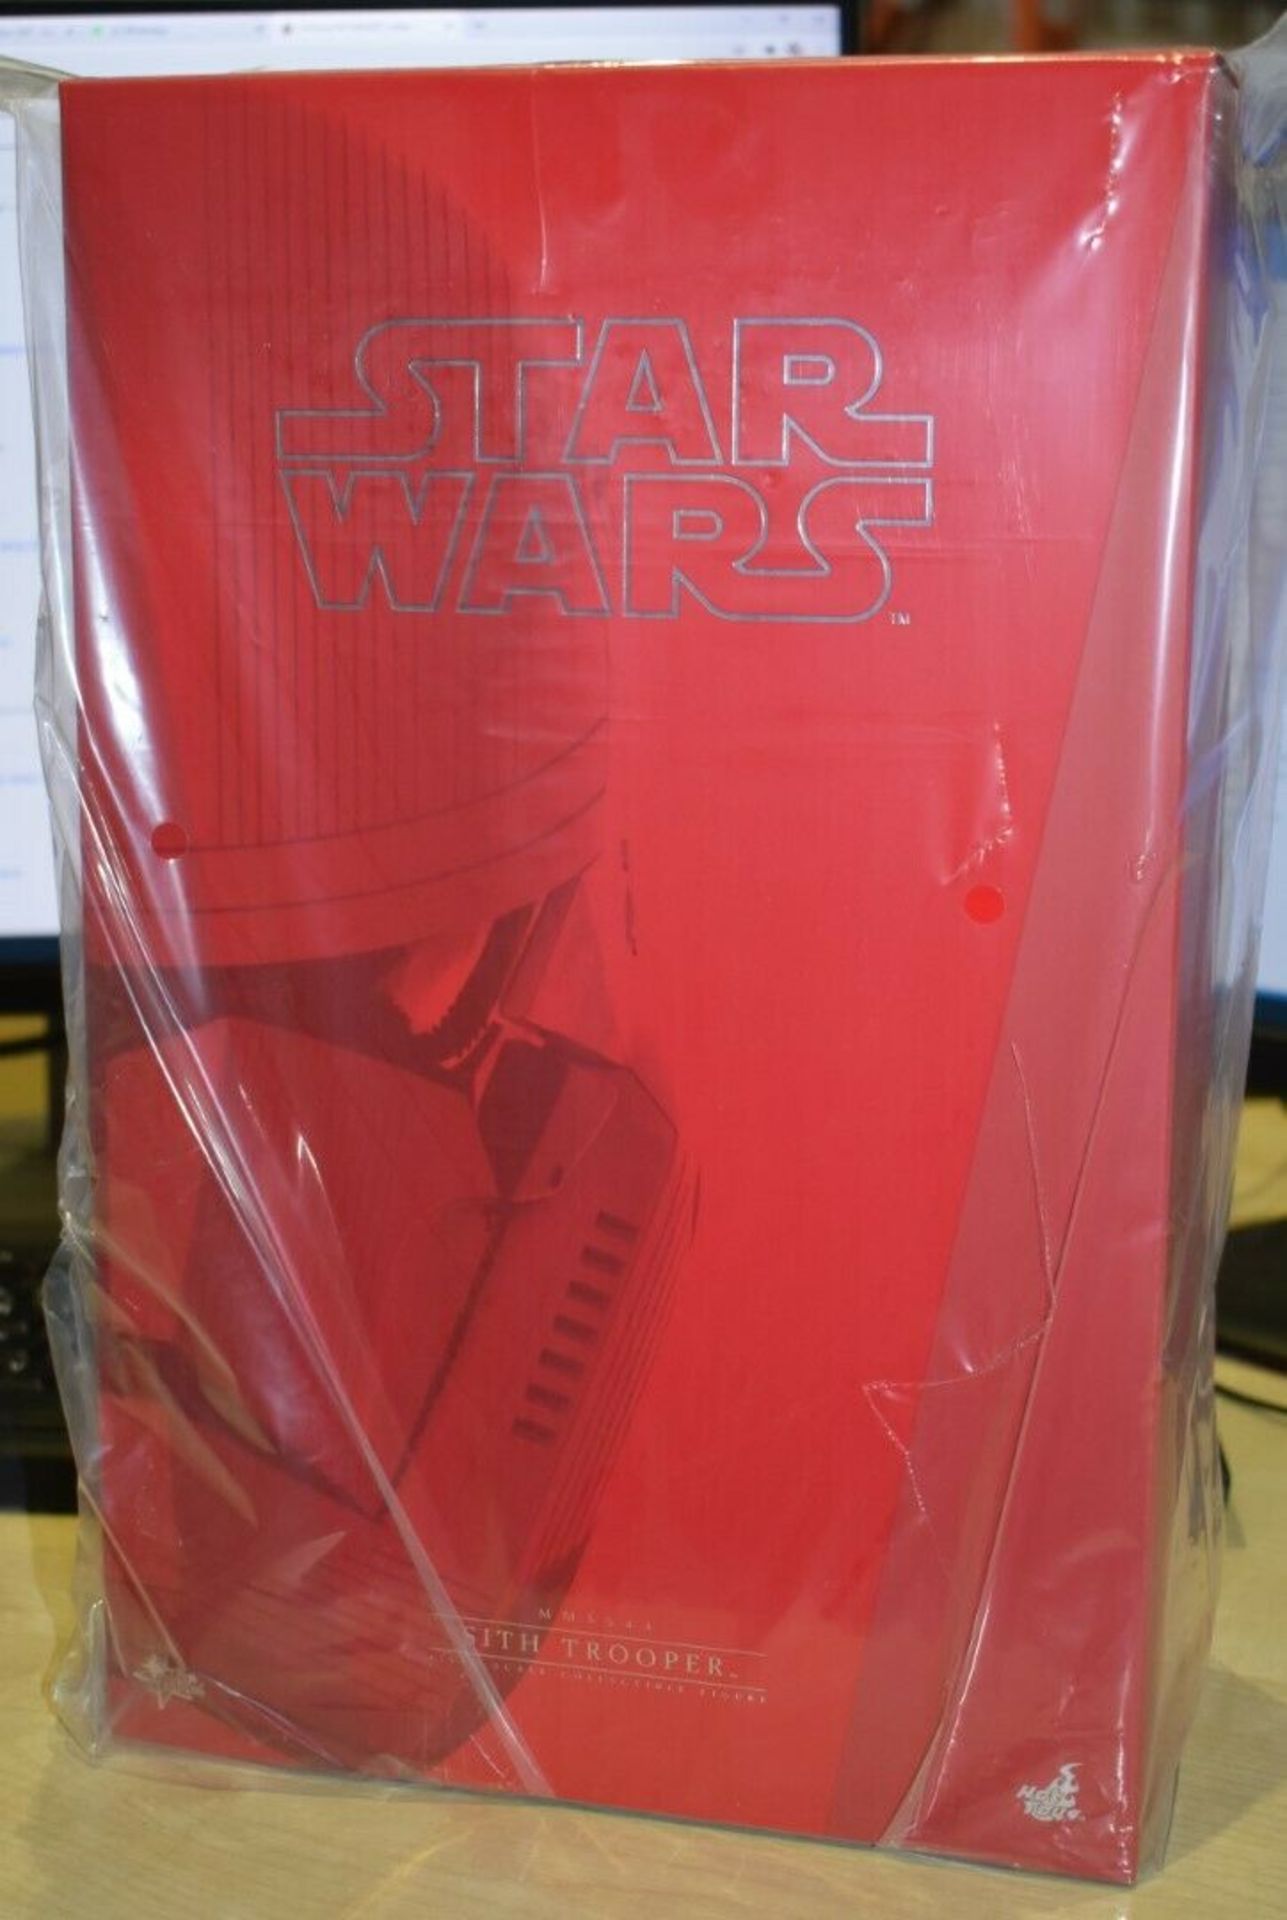 1 x Official Hot Toys Star Wars Rise of Skywalker Exclusive Sith Trooper 1/6 Scale Figure - MMS544 - - Image 3 of 3